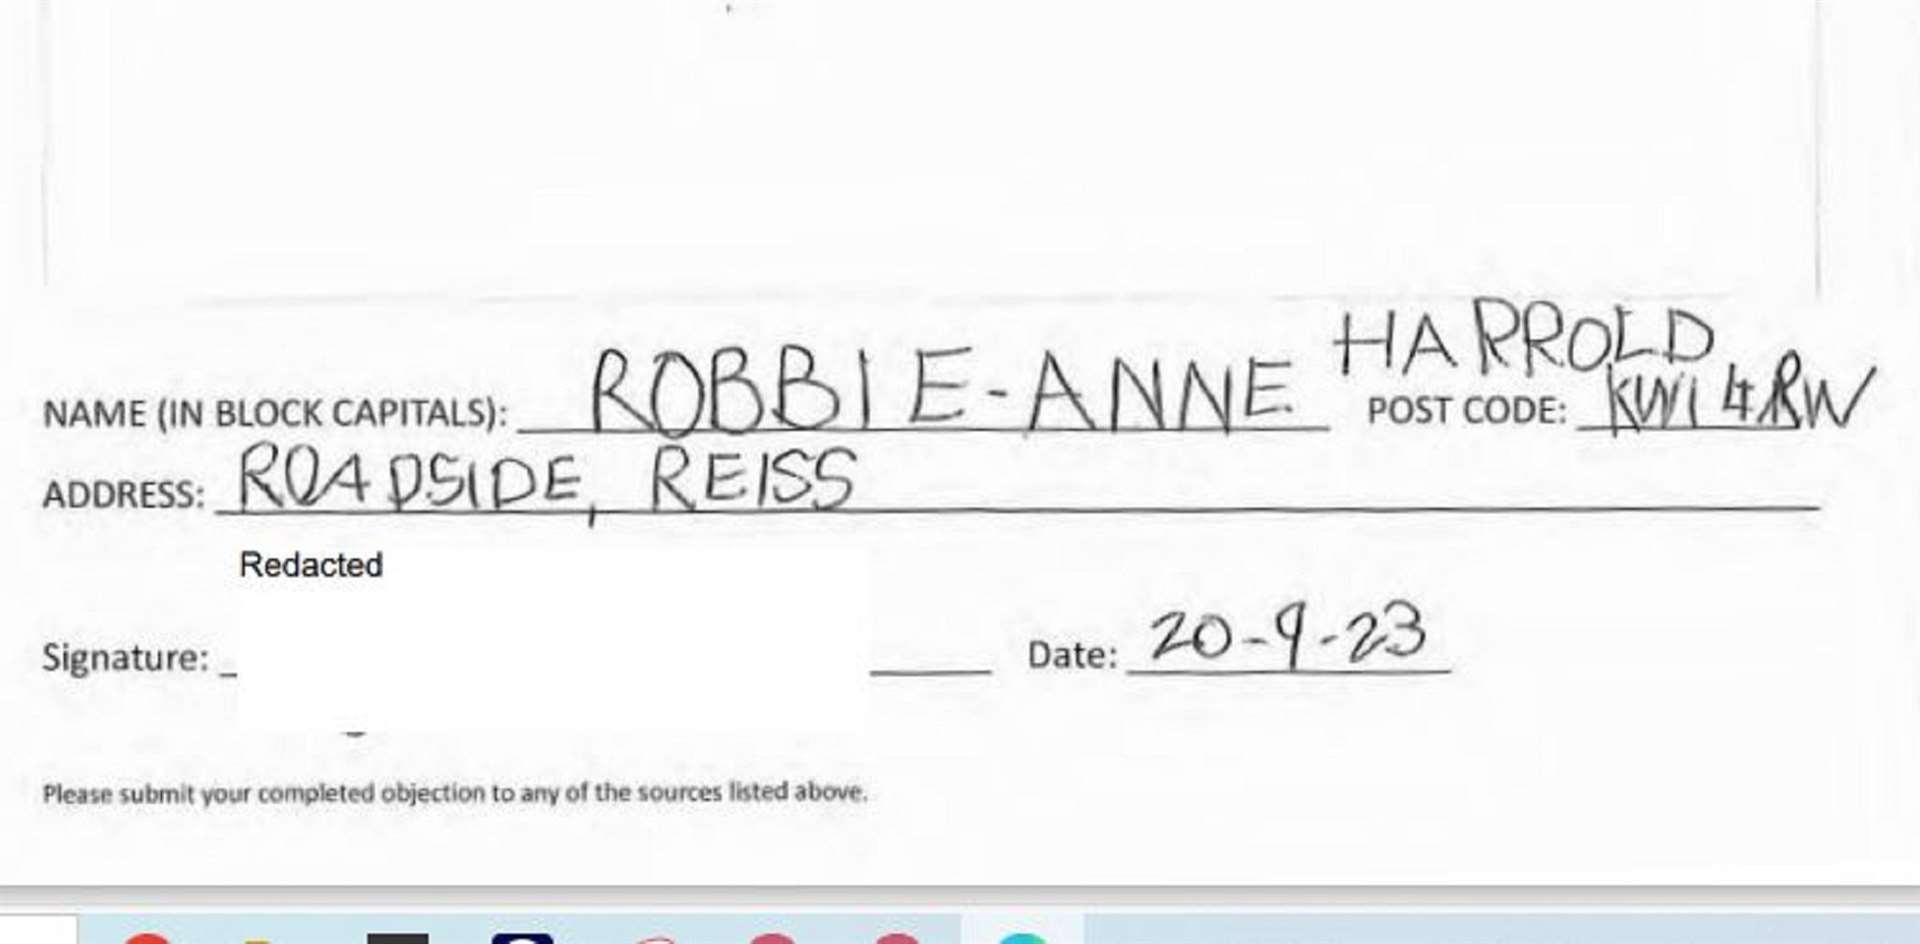 Part of the fake document sent in with Bib's name showing that she was 'removing' her objection.